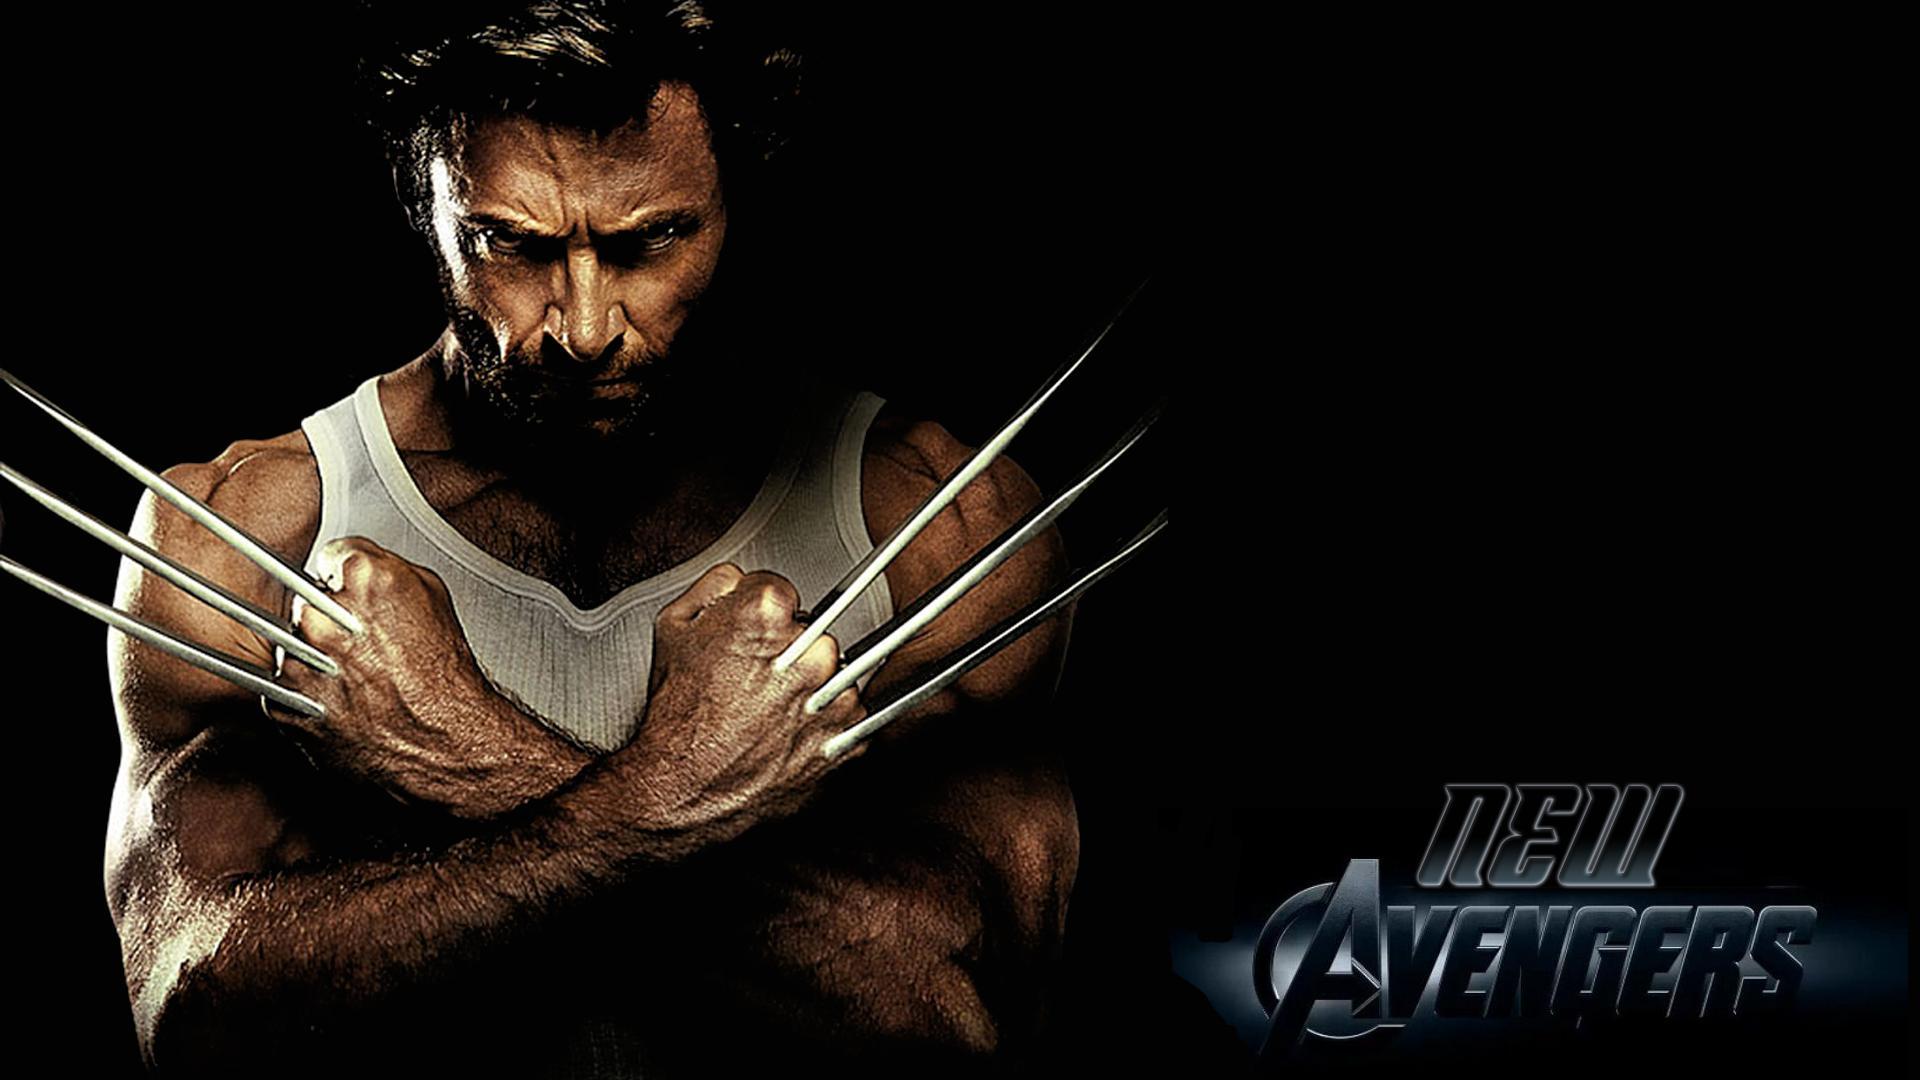 wolverine wallpaper,wolverine,wolverine,fictional character,action film,movie